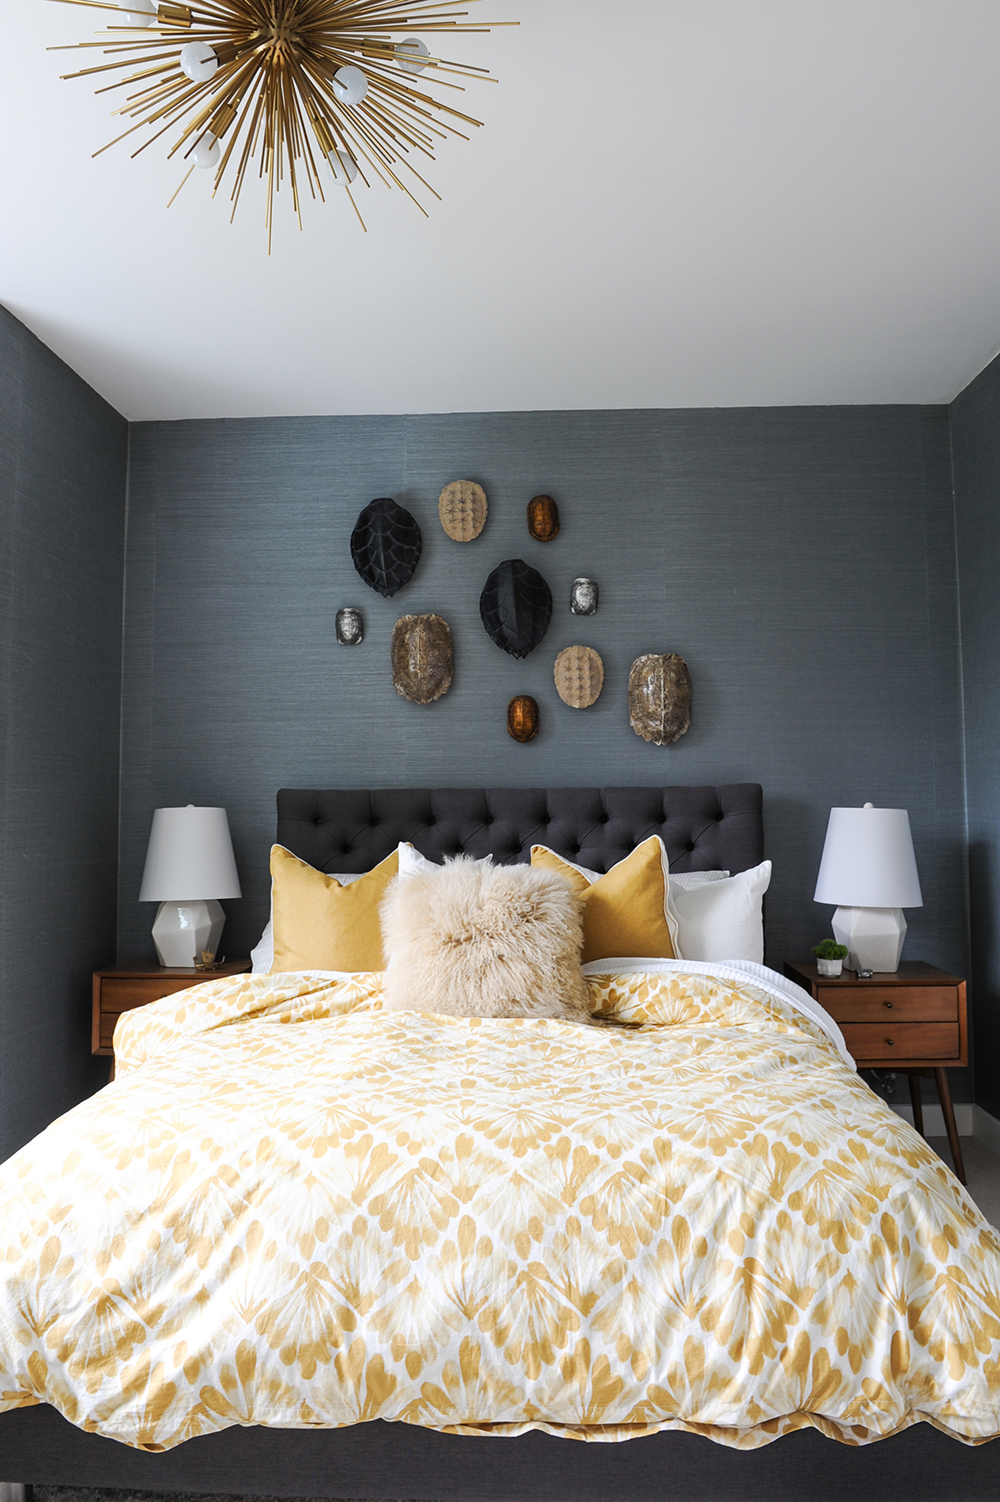 A dark and moody master bedroom uplifted with bright mustard hues.